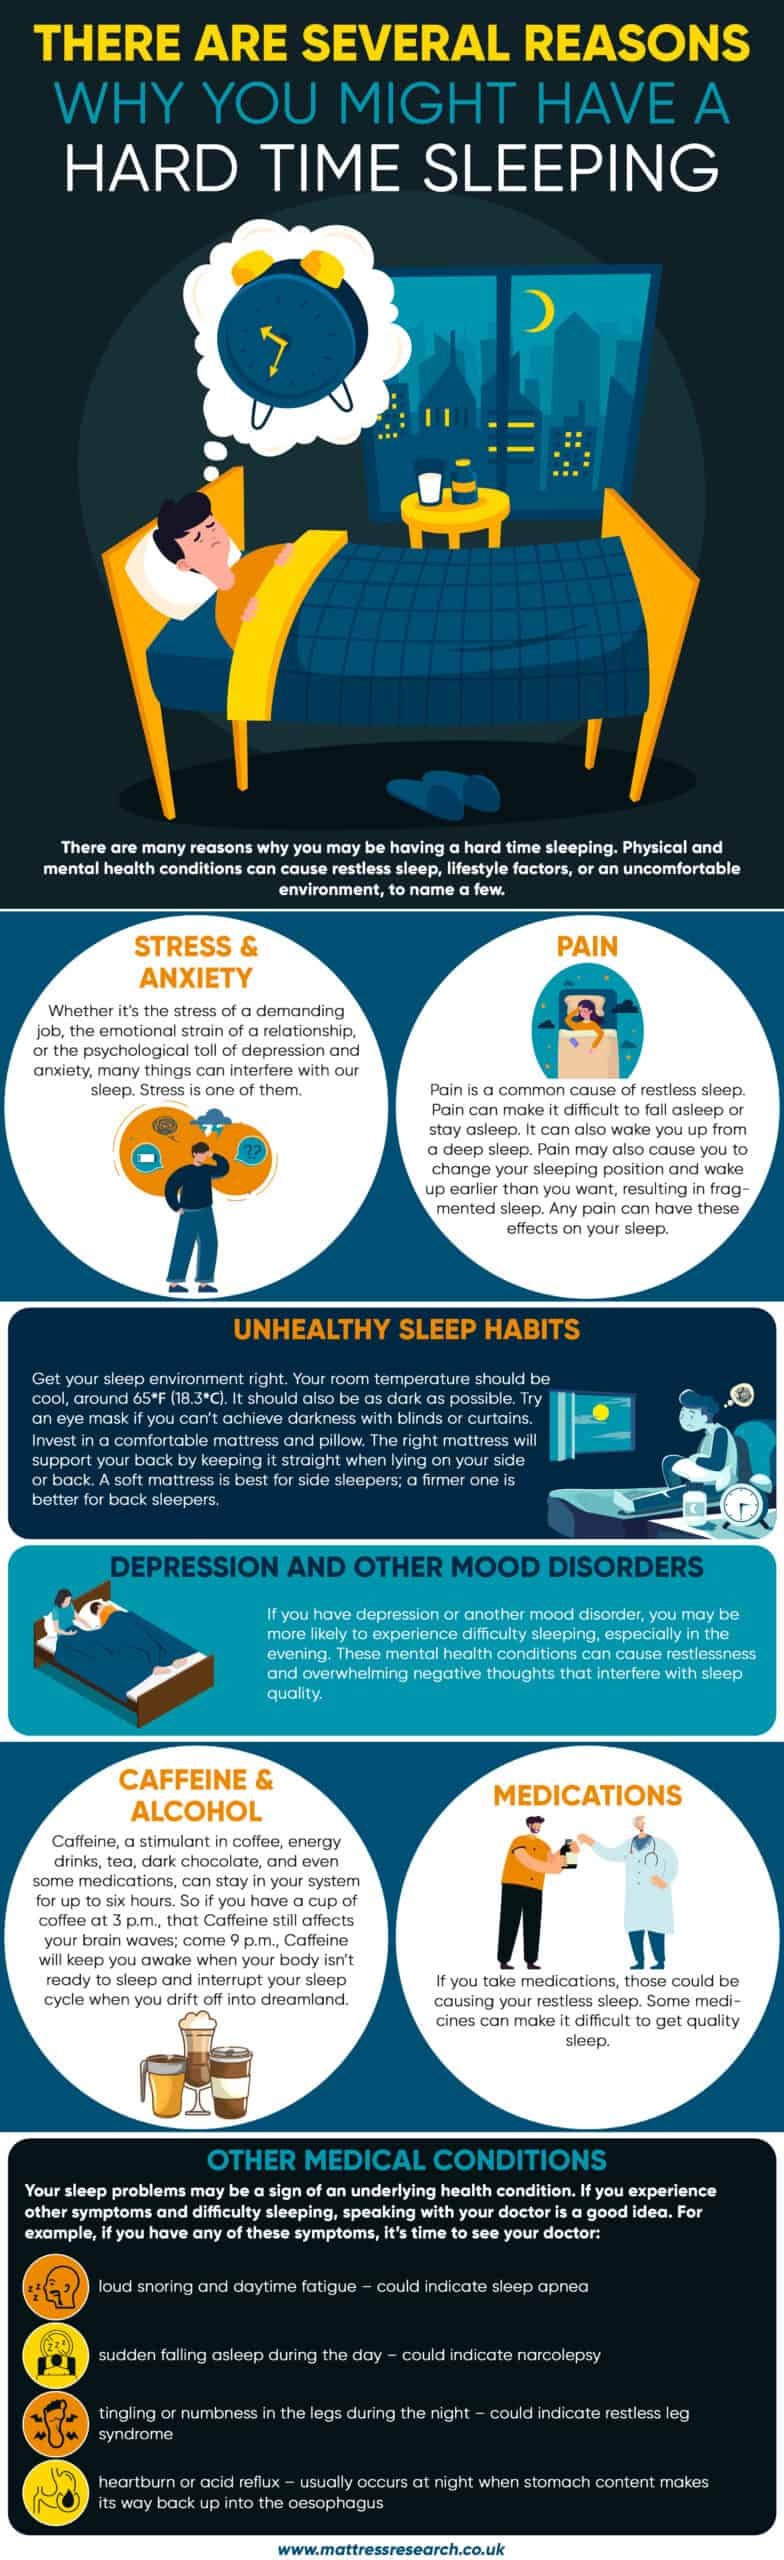 There are several reasons why you might have a hard time sleeping